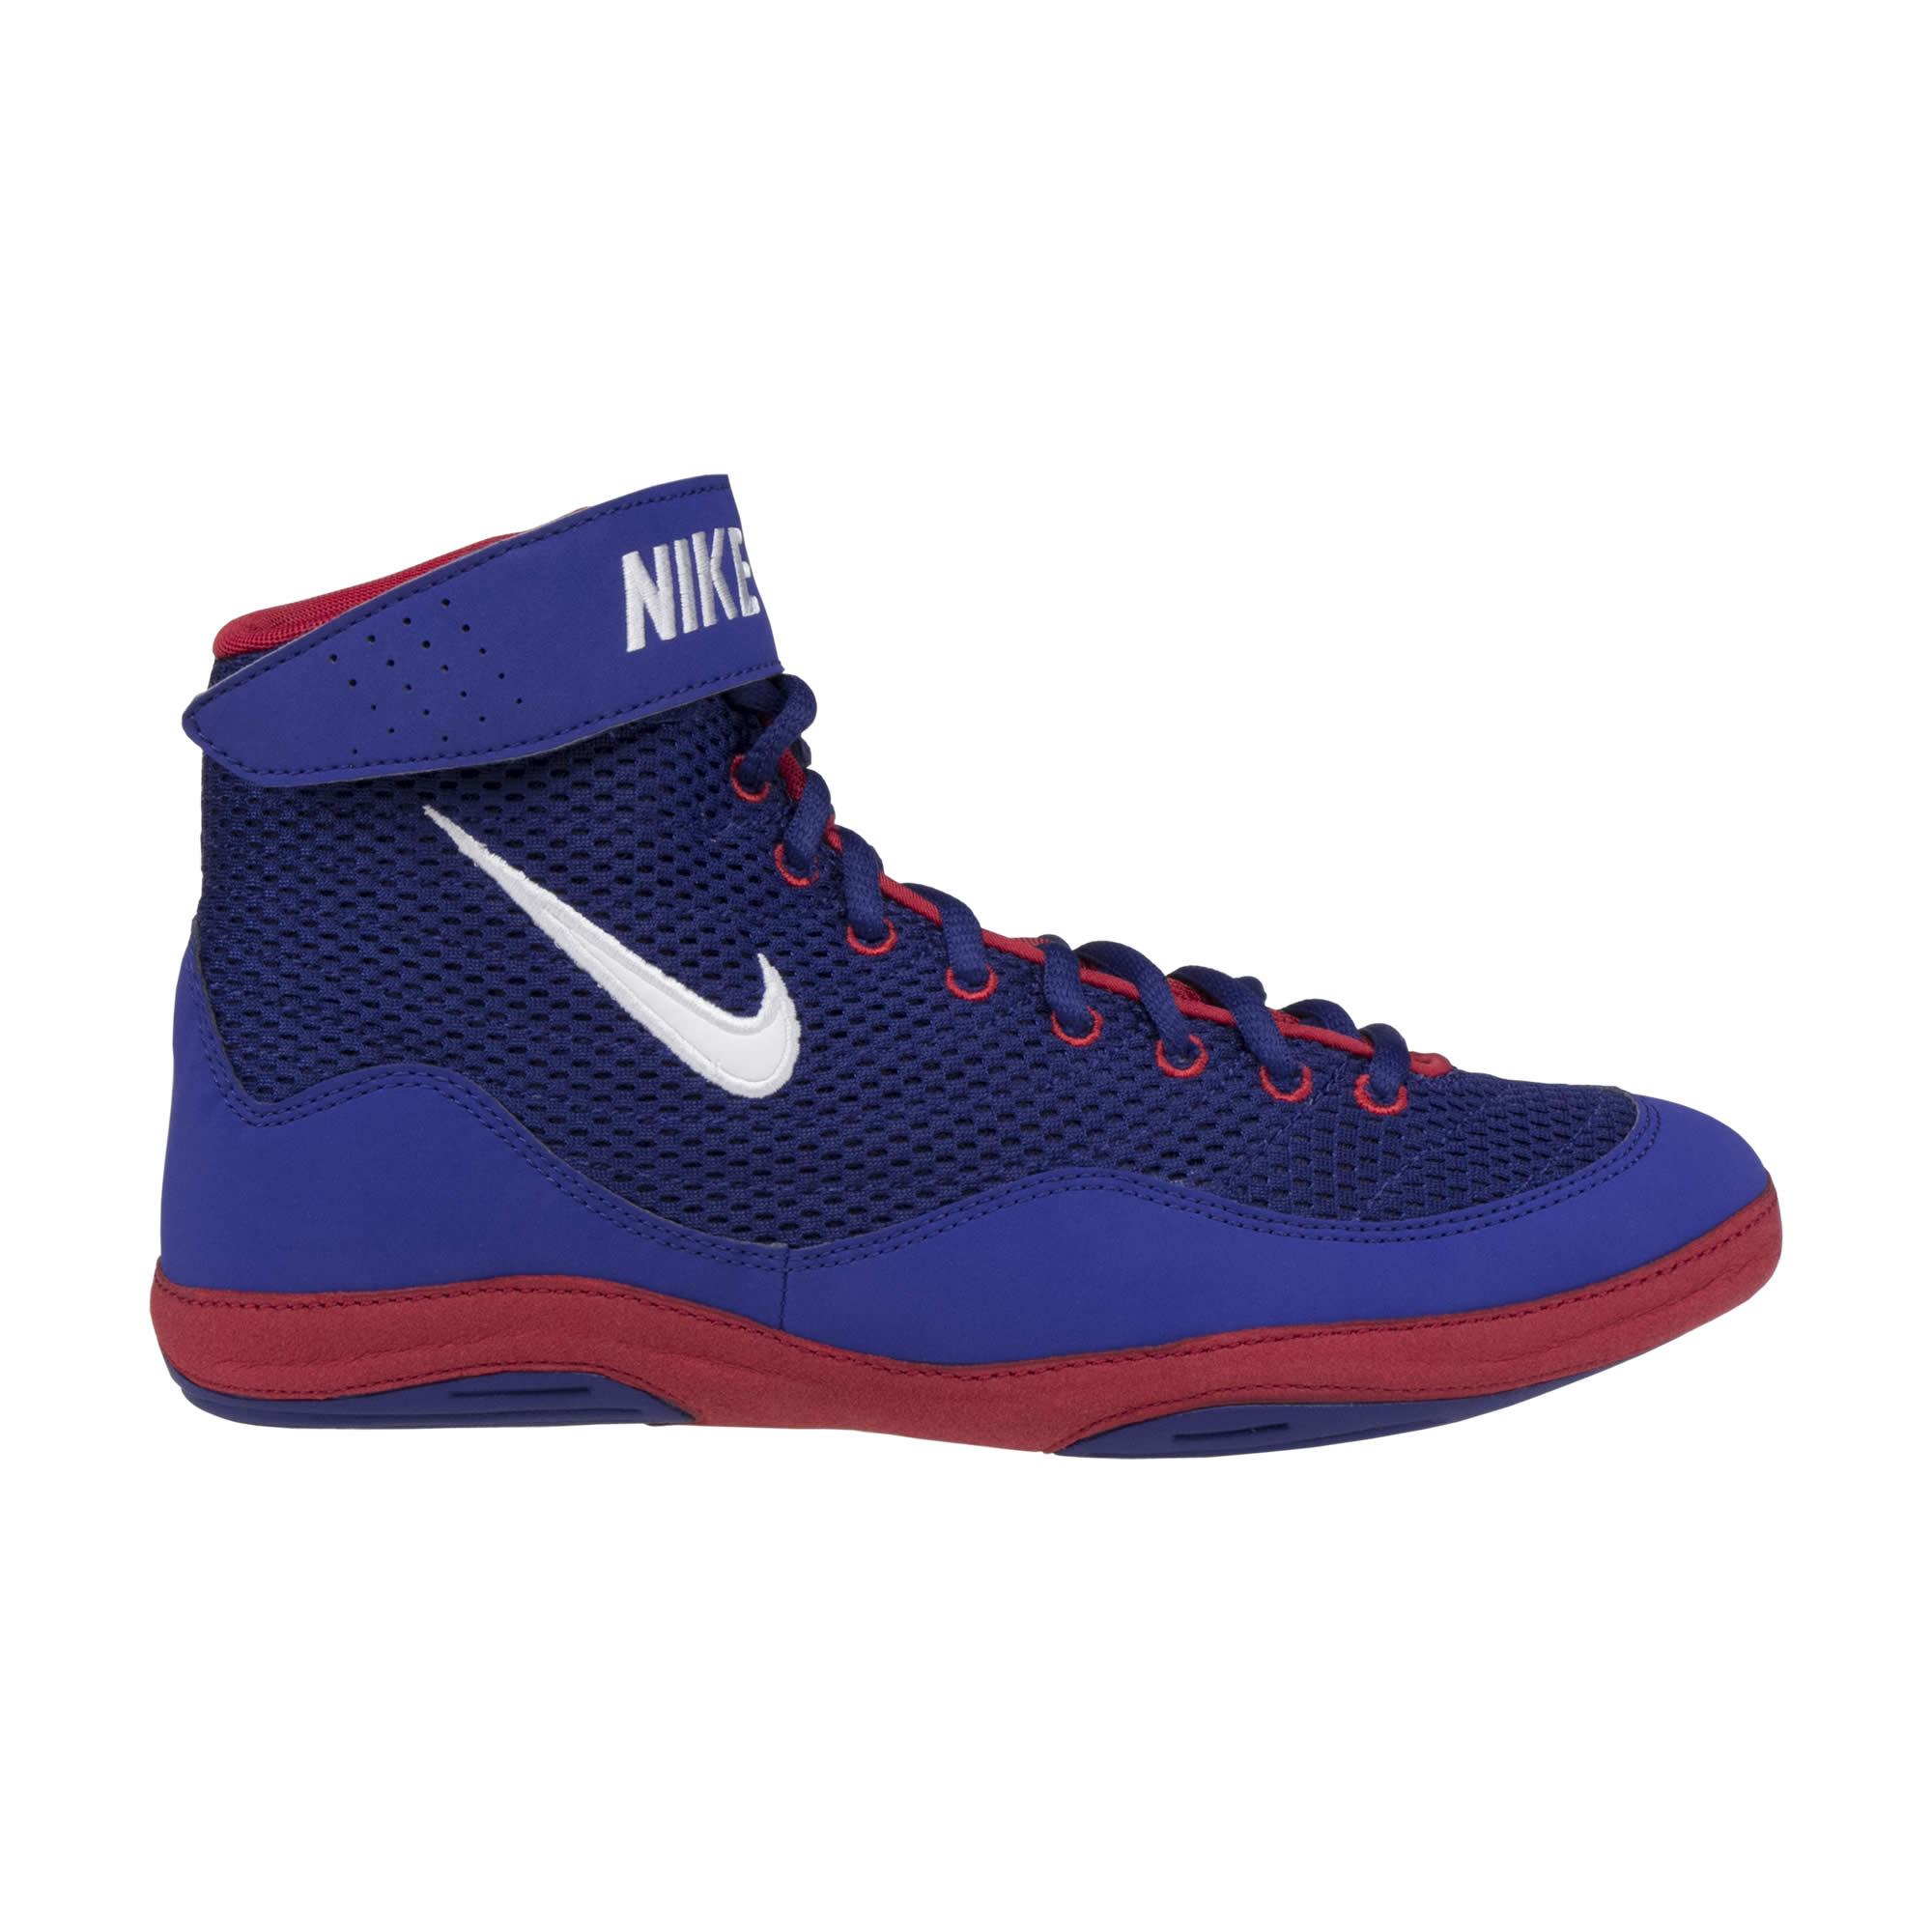 Red and Blue Nike Logo - Nike Inflict 3 Shoes | WrestlingMart | Free Shipping